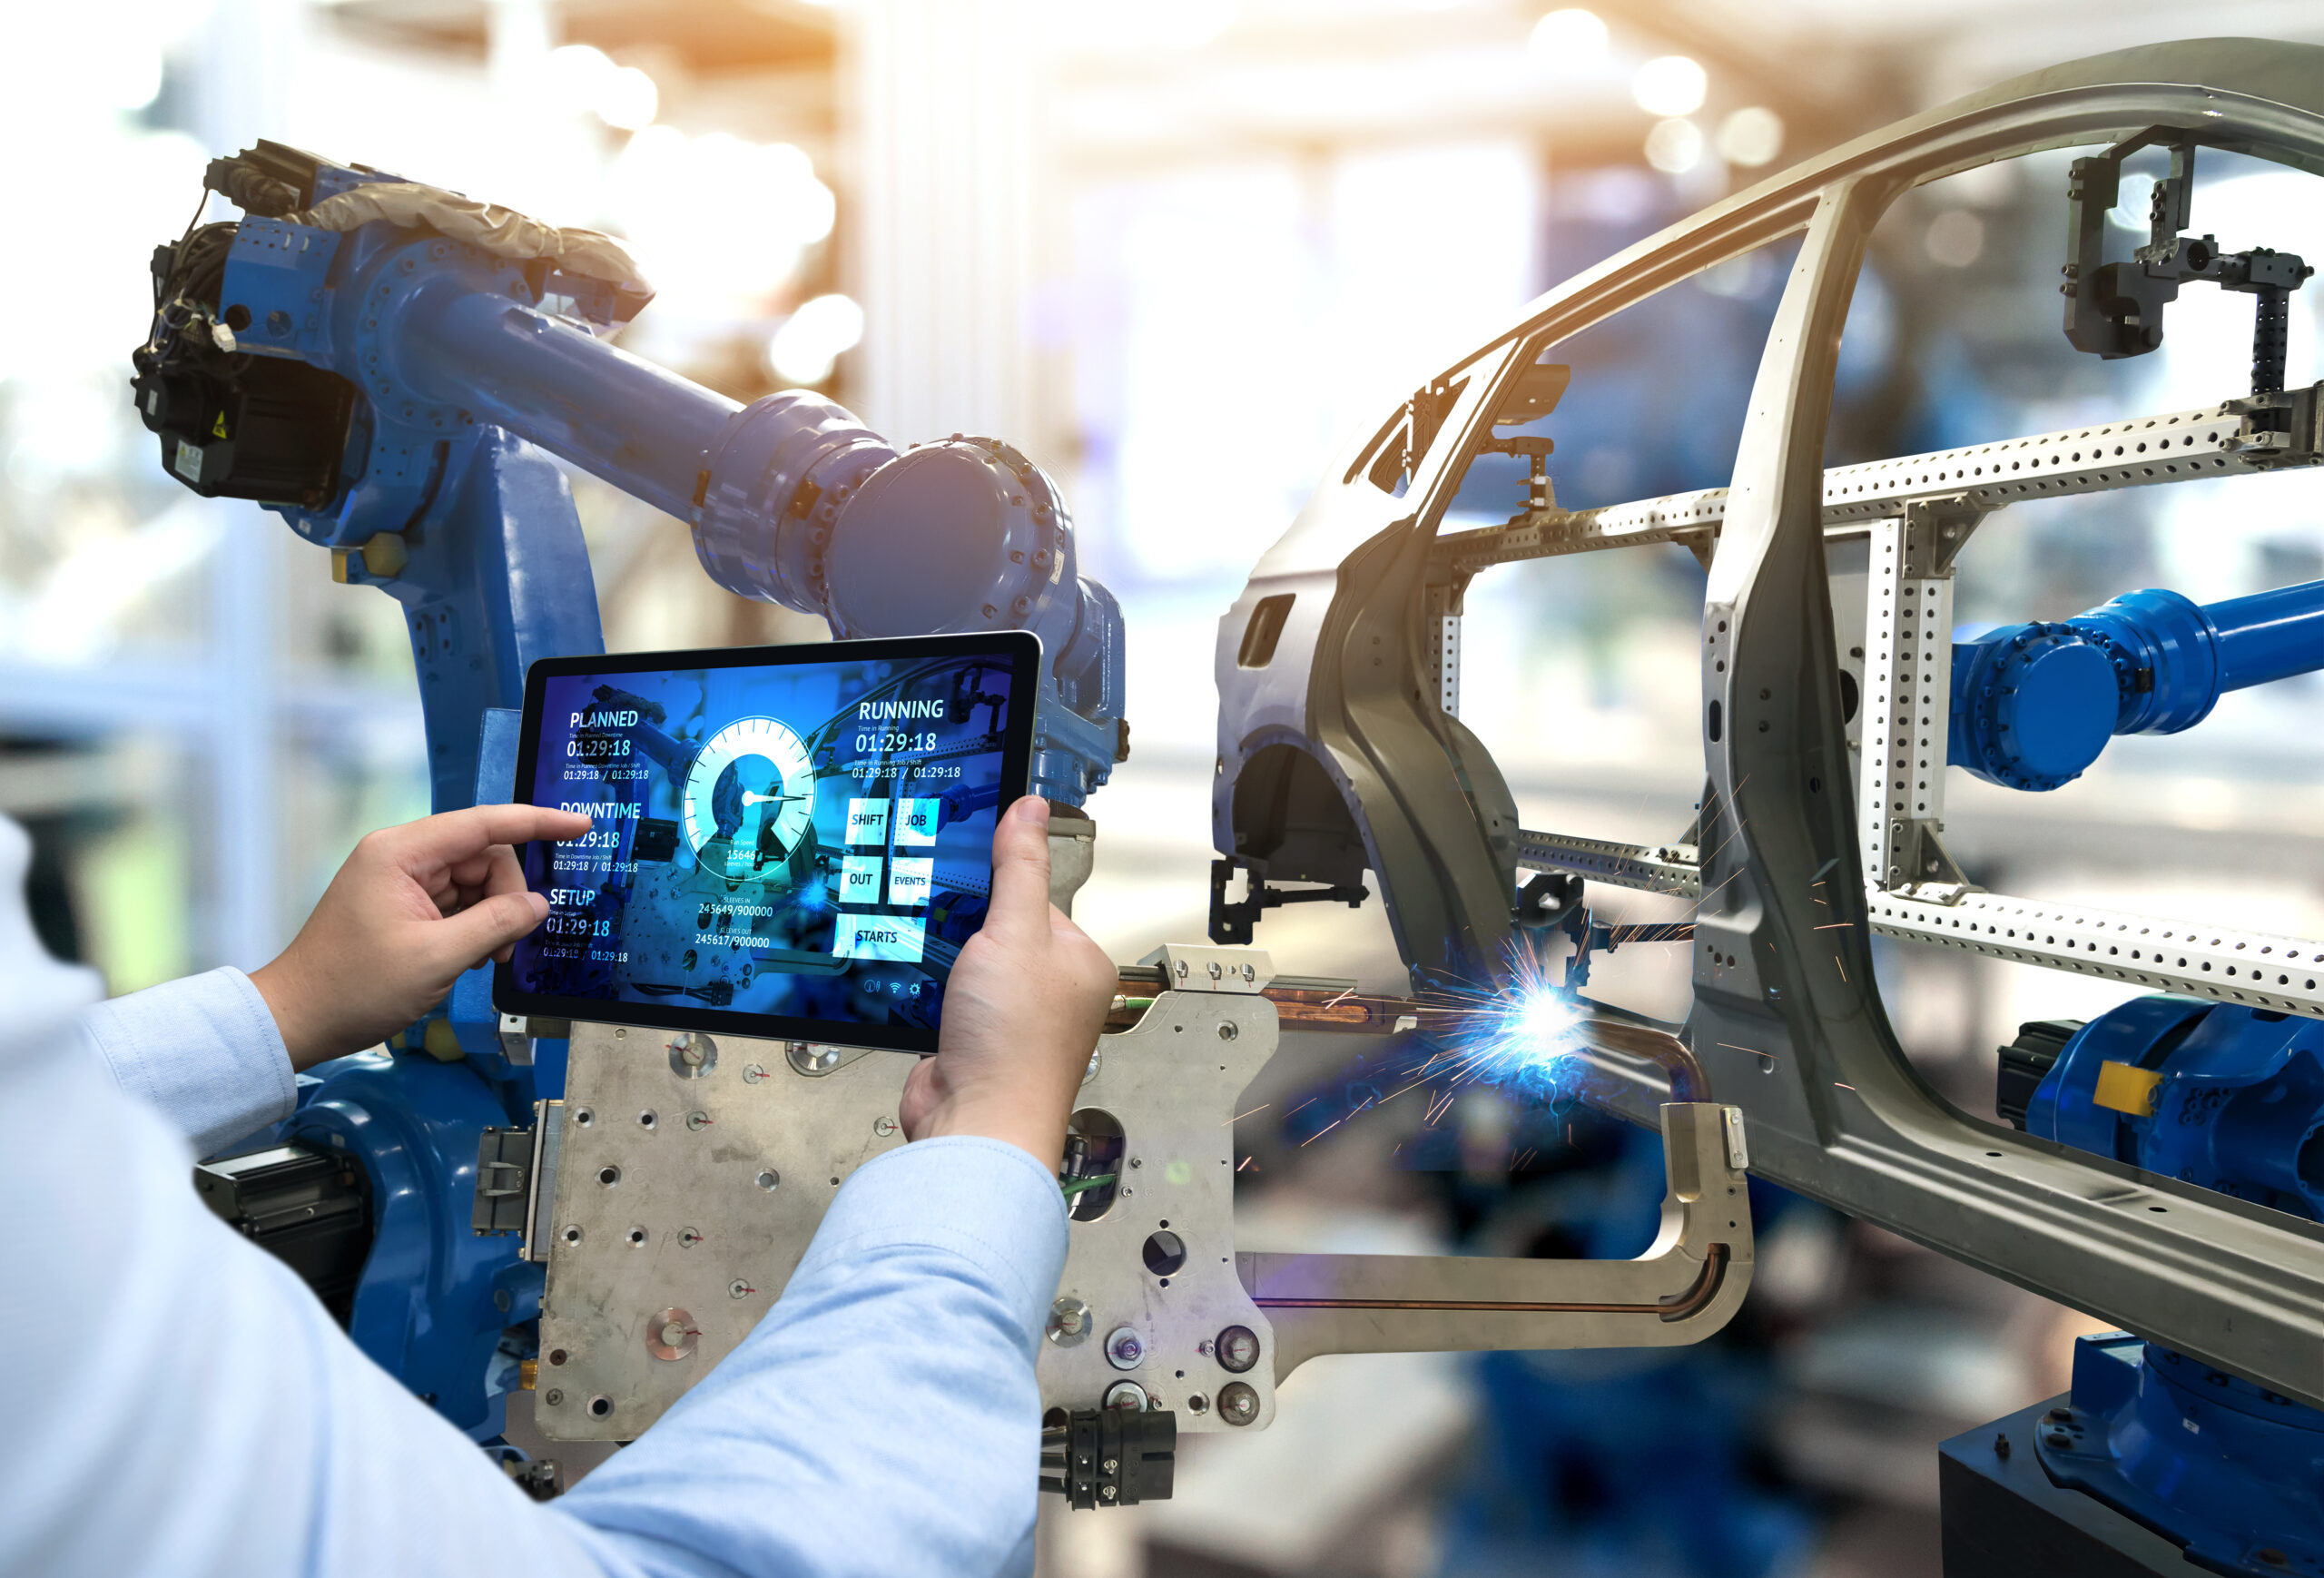 How to Car Manufacturing with Robots - RoboDK blog